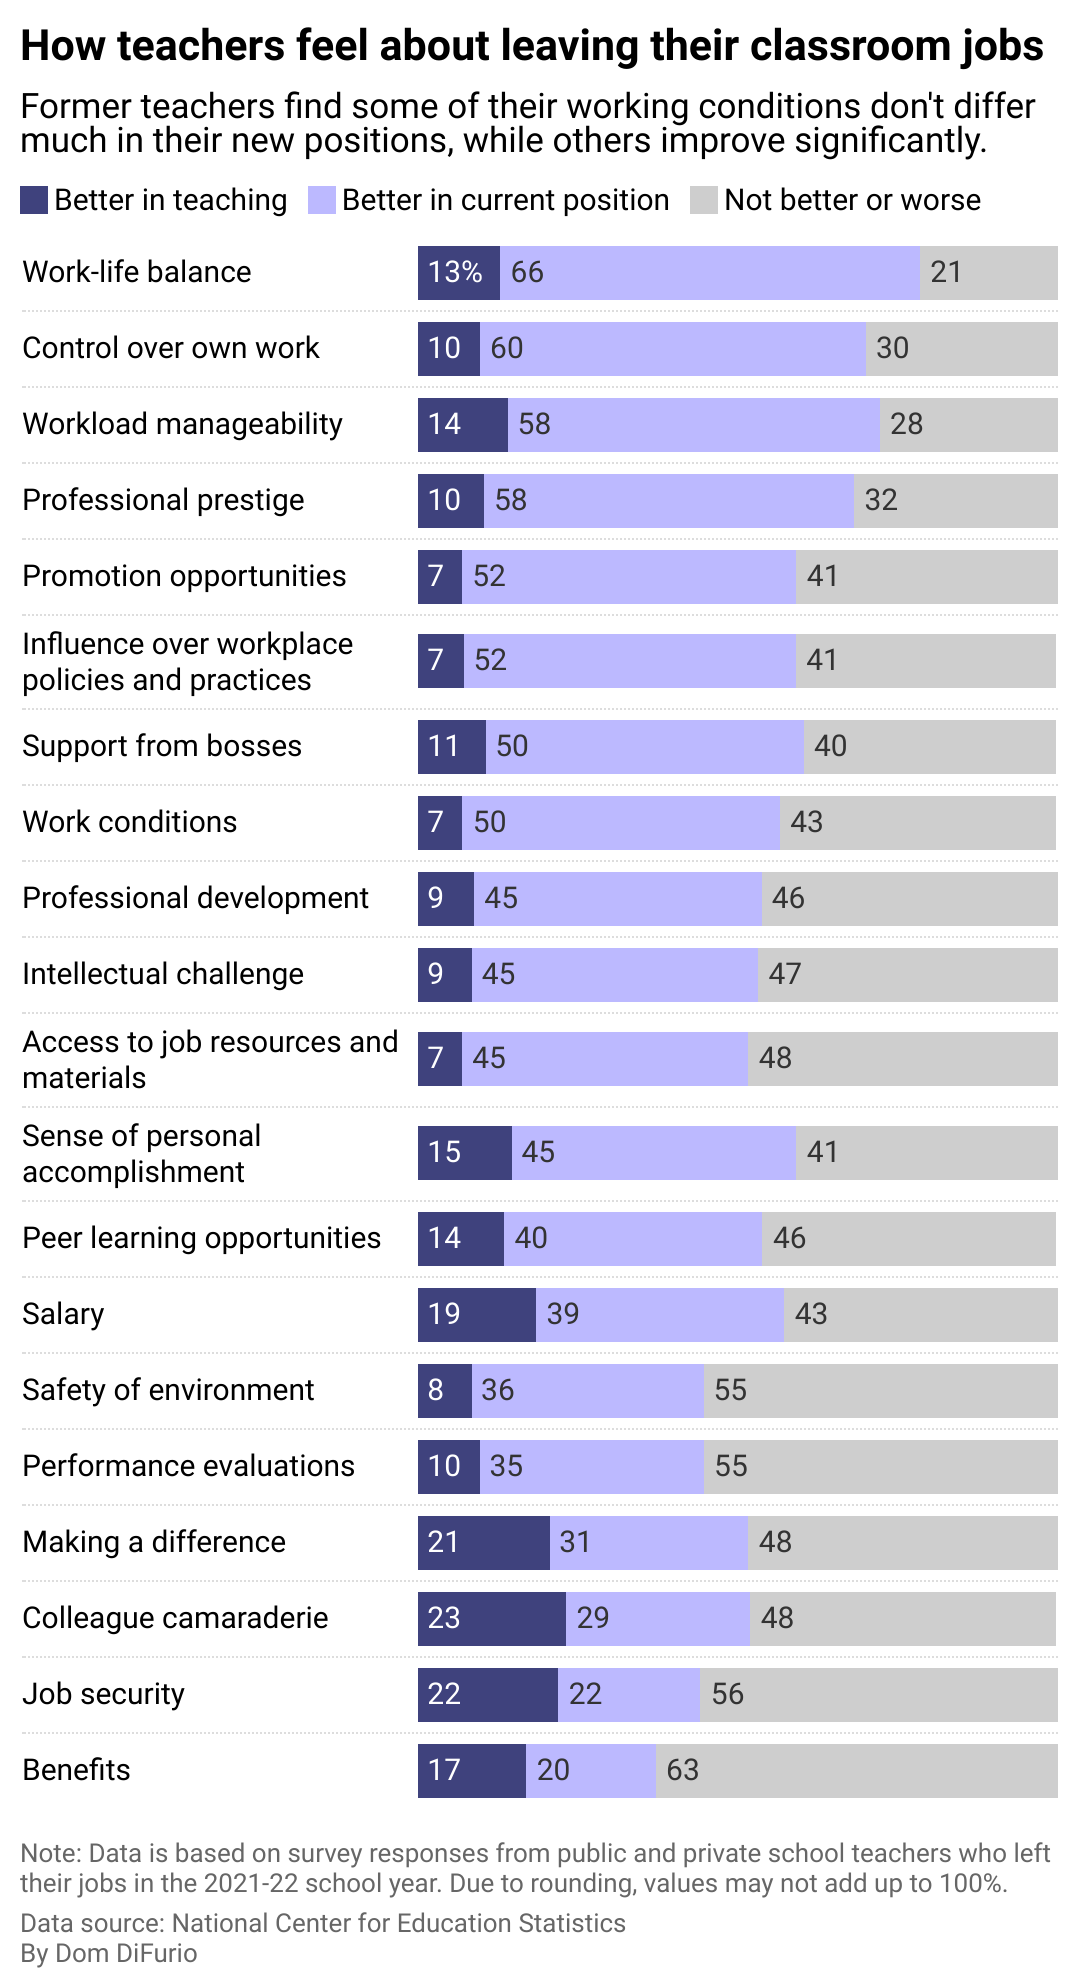 A stacked bar chart showing how teachers felt about jobs they took outside of education compared to their previous teaching jobs. The largest percentage of teachers reported that work-life balance, control over work, manageable workload, prestige, and potential for professional advancement were better in their new, non-teaching jobs.